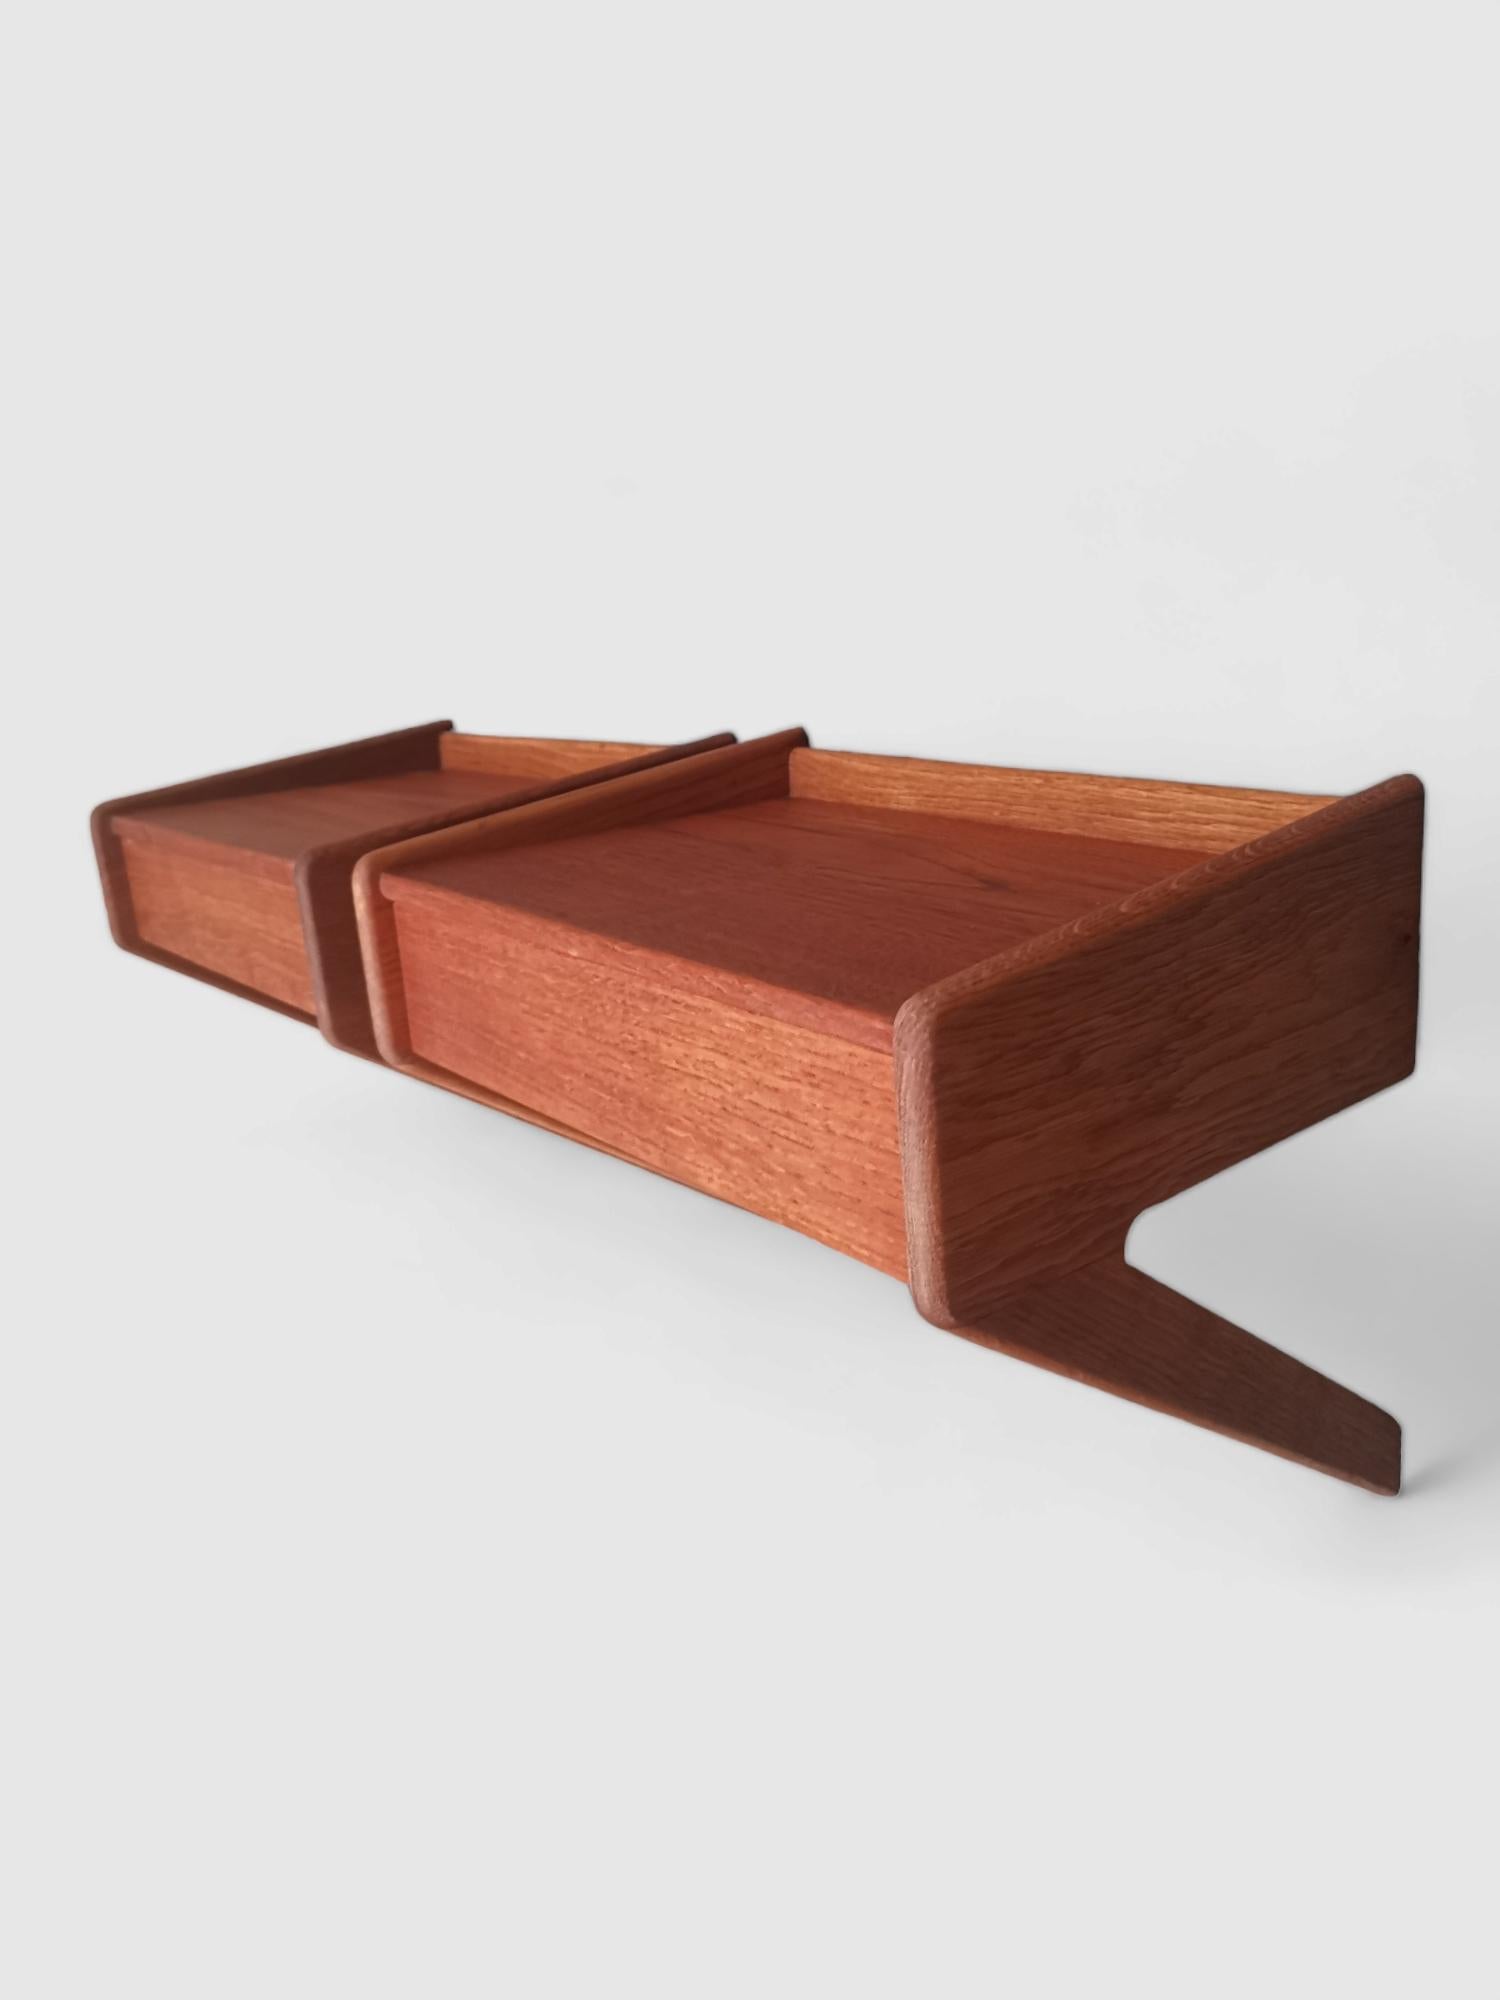 Classic Danish Wall Mounted Teak Bedside Tables From the 60s, With One drawer in each nightstand,  so you can store away, and keep your space organized and clutter-free.
These Danish bedside tables is characterized by clean lines, minimalistic